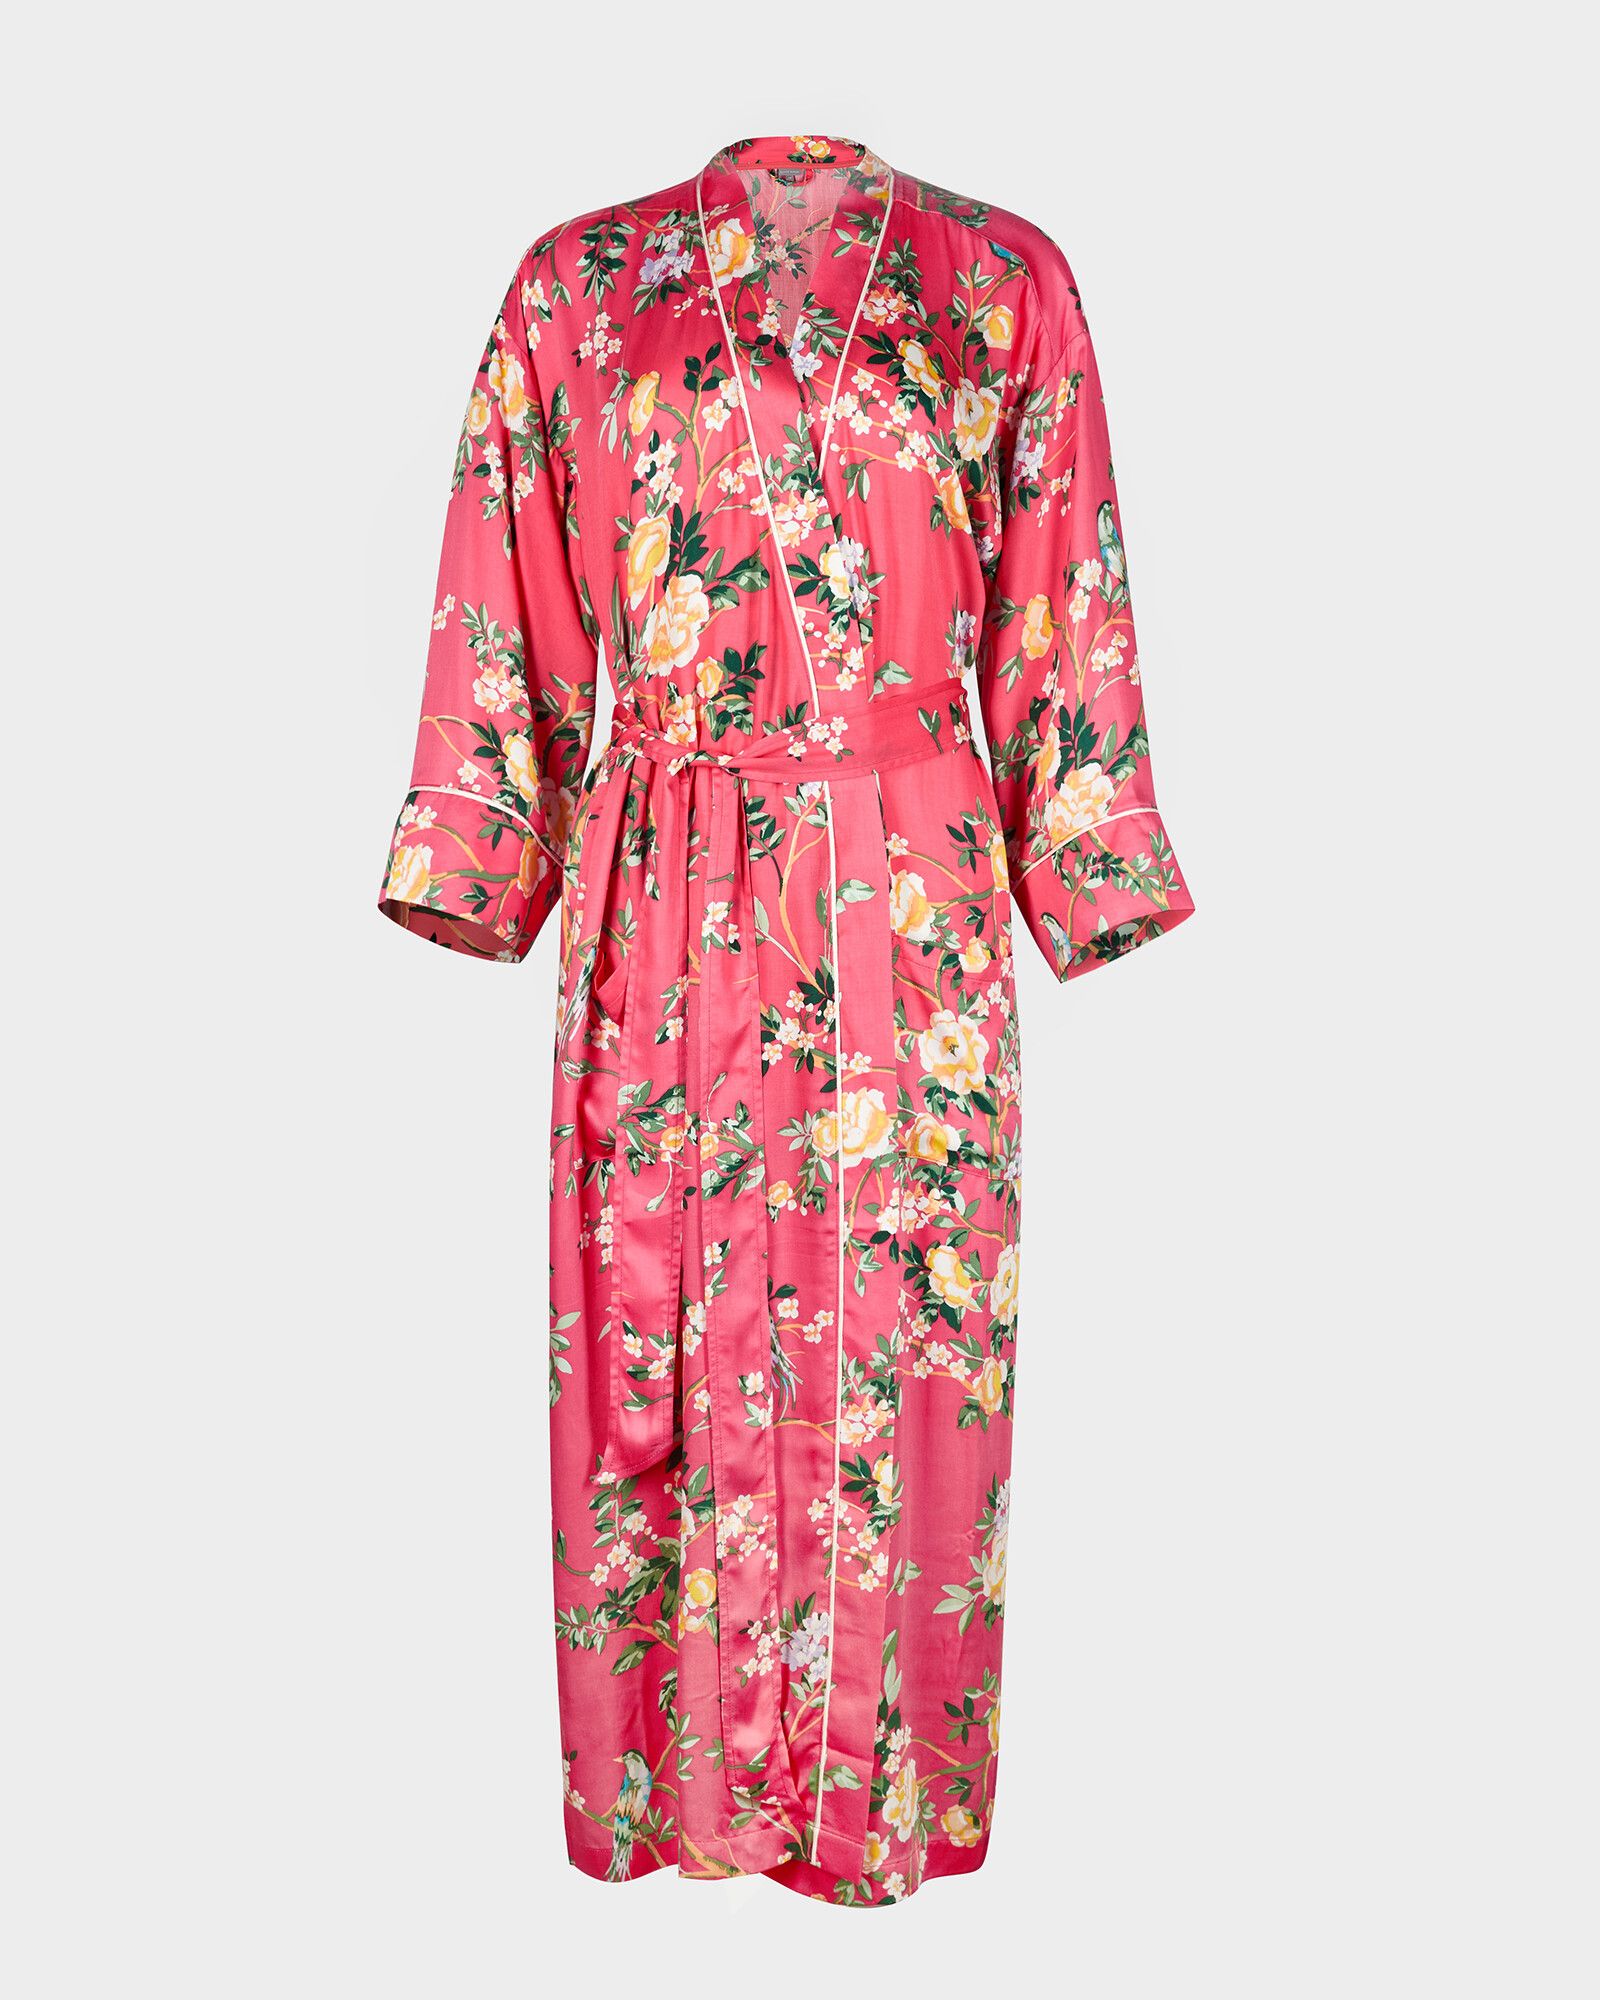 Floral Print Pink Long Tie Waist Robe Dressing Gown | Oliver Bonas